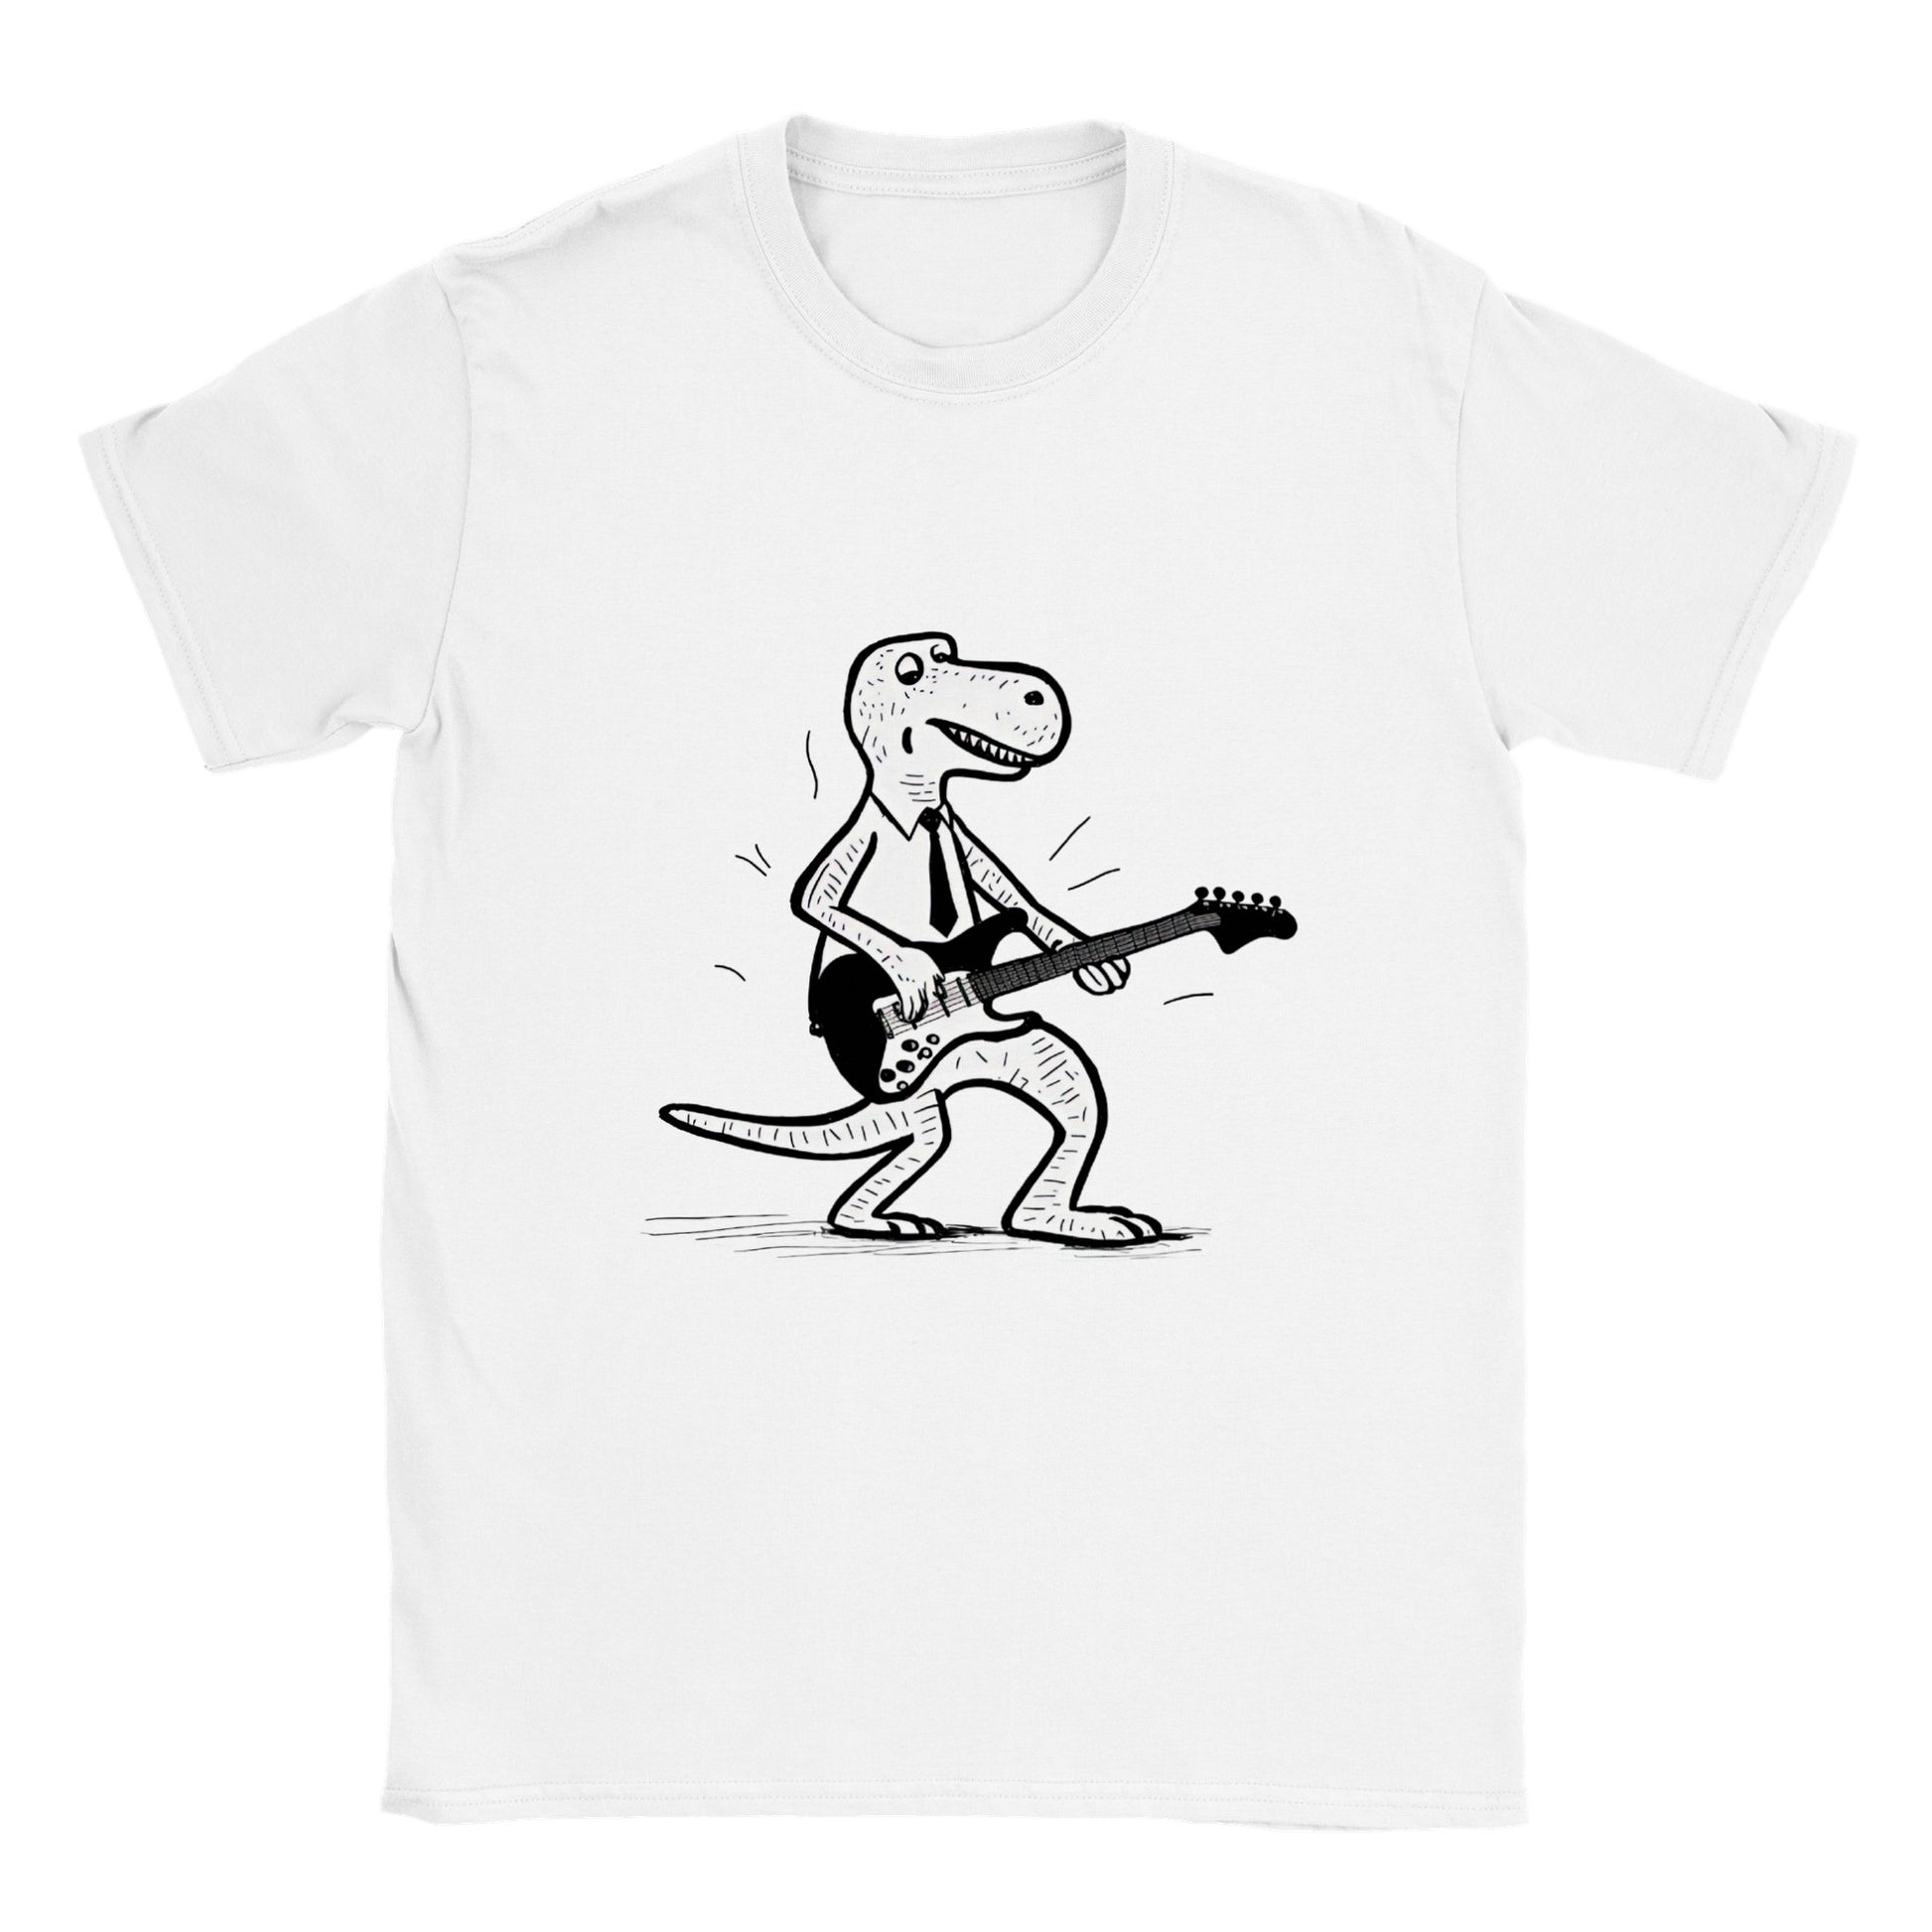 t-rex dinosaur wearing a tie playing the guitar on a white t-shirt